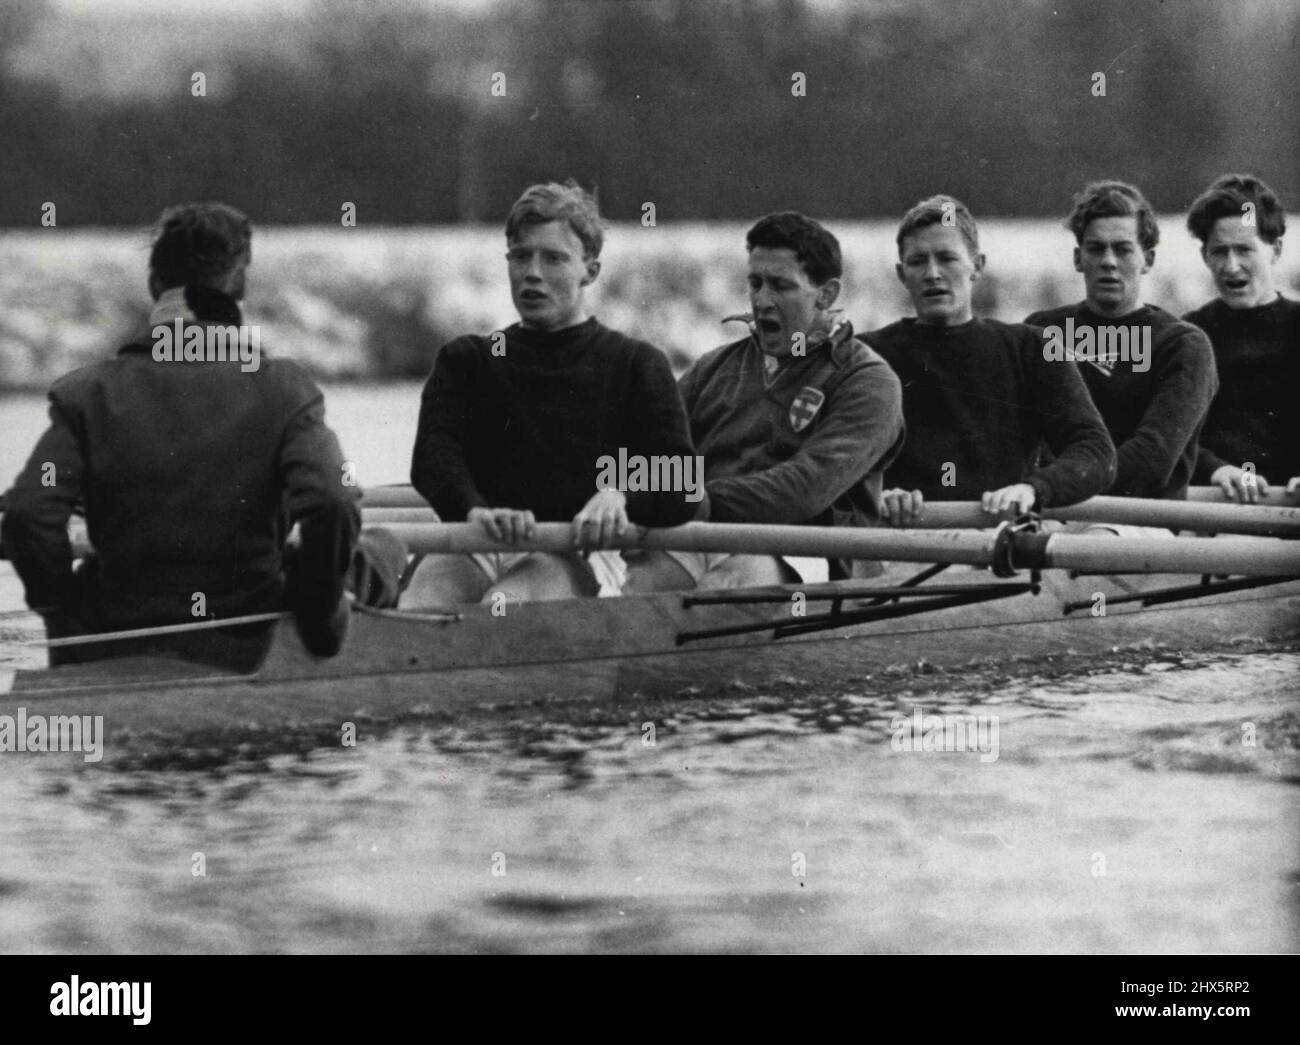 Oxford Train Without President -- Expressions from the Dark Blues as they pullin rough water during a spell at Wallingford from left to right. Watson, Cox, Sorell, Pain, McLeod, Raikes and Wells. Oxford University boat crew still without their President J.A. Gobbo. Have not yet placed the crew as they will race in the forthcomming annual. M.L. Ross is subsitute for Gobbo, who has influence. February 24, 1955. (Photo by Fox Photos ). Stock Photo